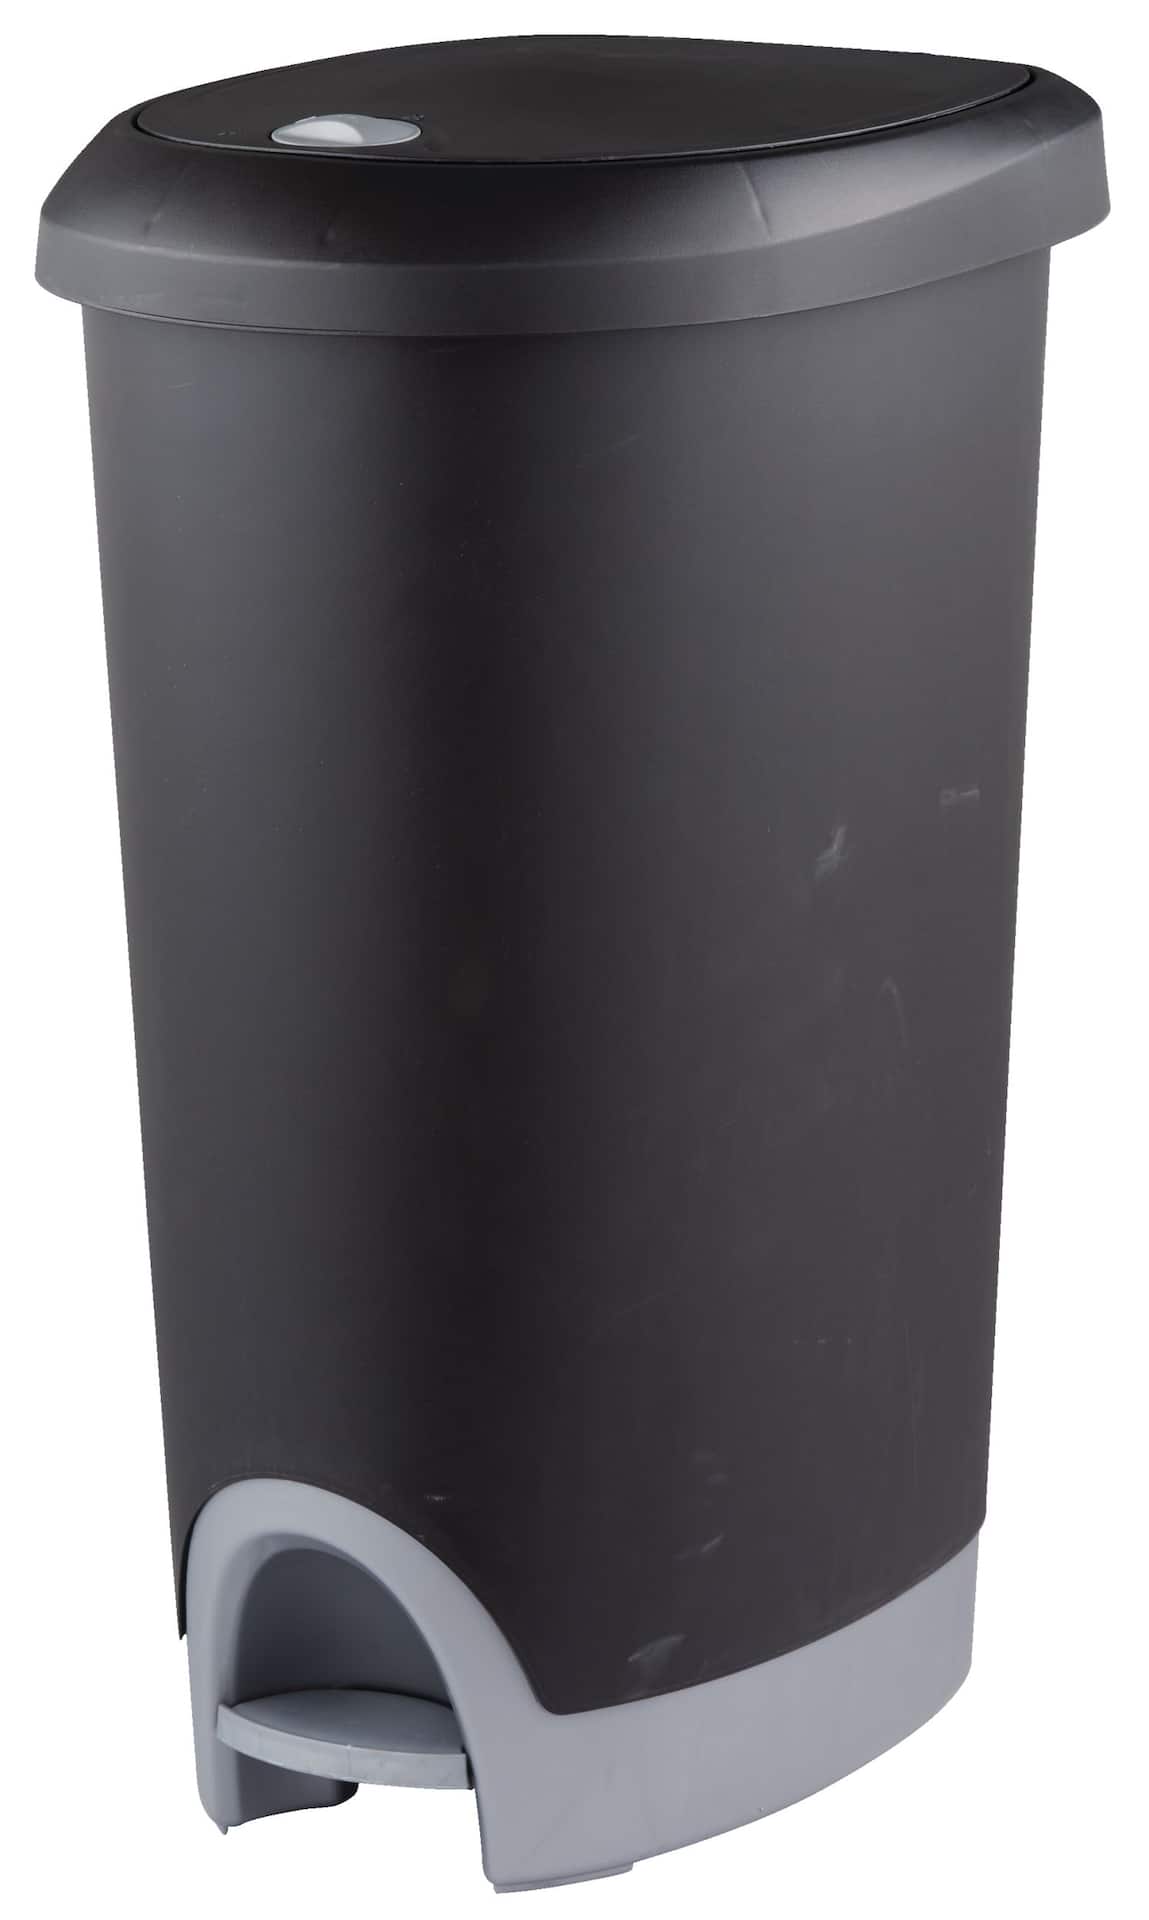 Sterilite Plastic D-Shaped Step Garbage Can with Locking Lid, Black/Grey,  48-L